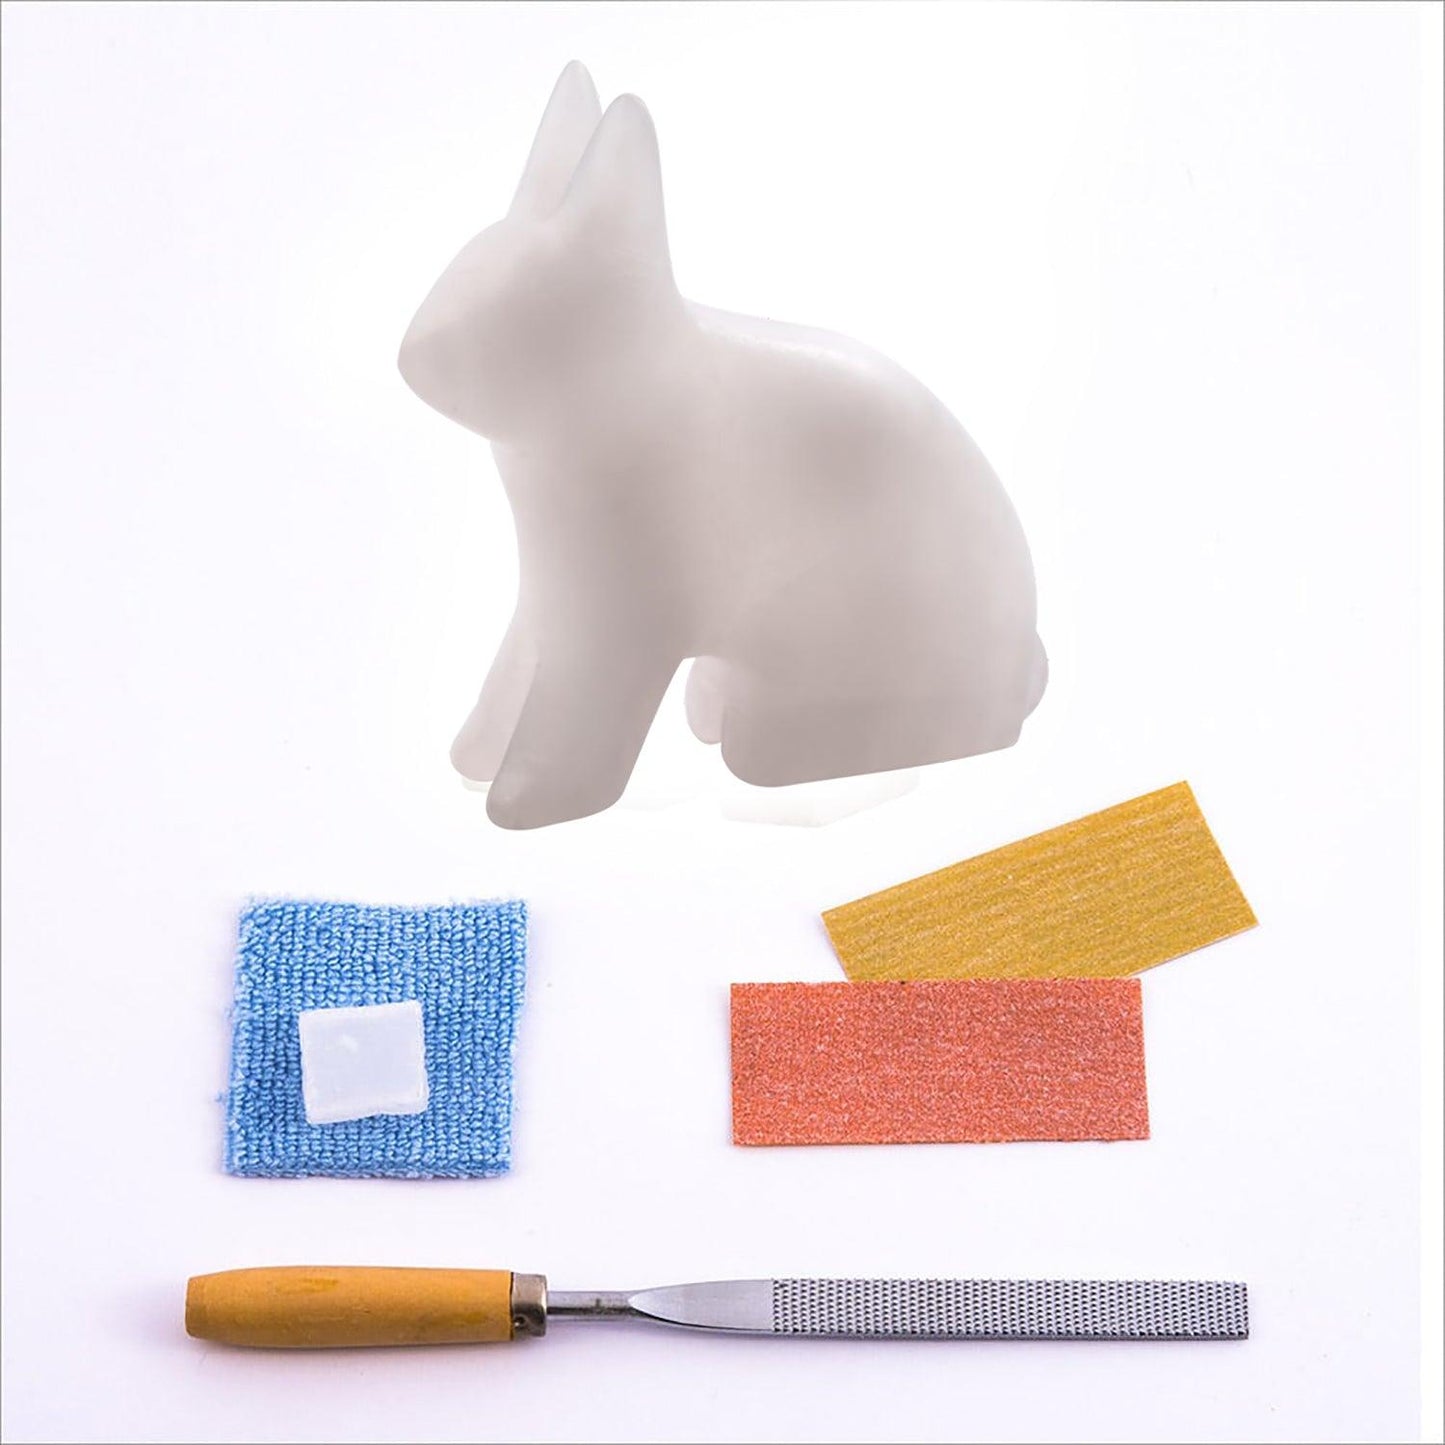 Mothers Day Gift - Arctic Hare Alabaster Carving Kit - Loomini